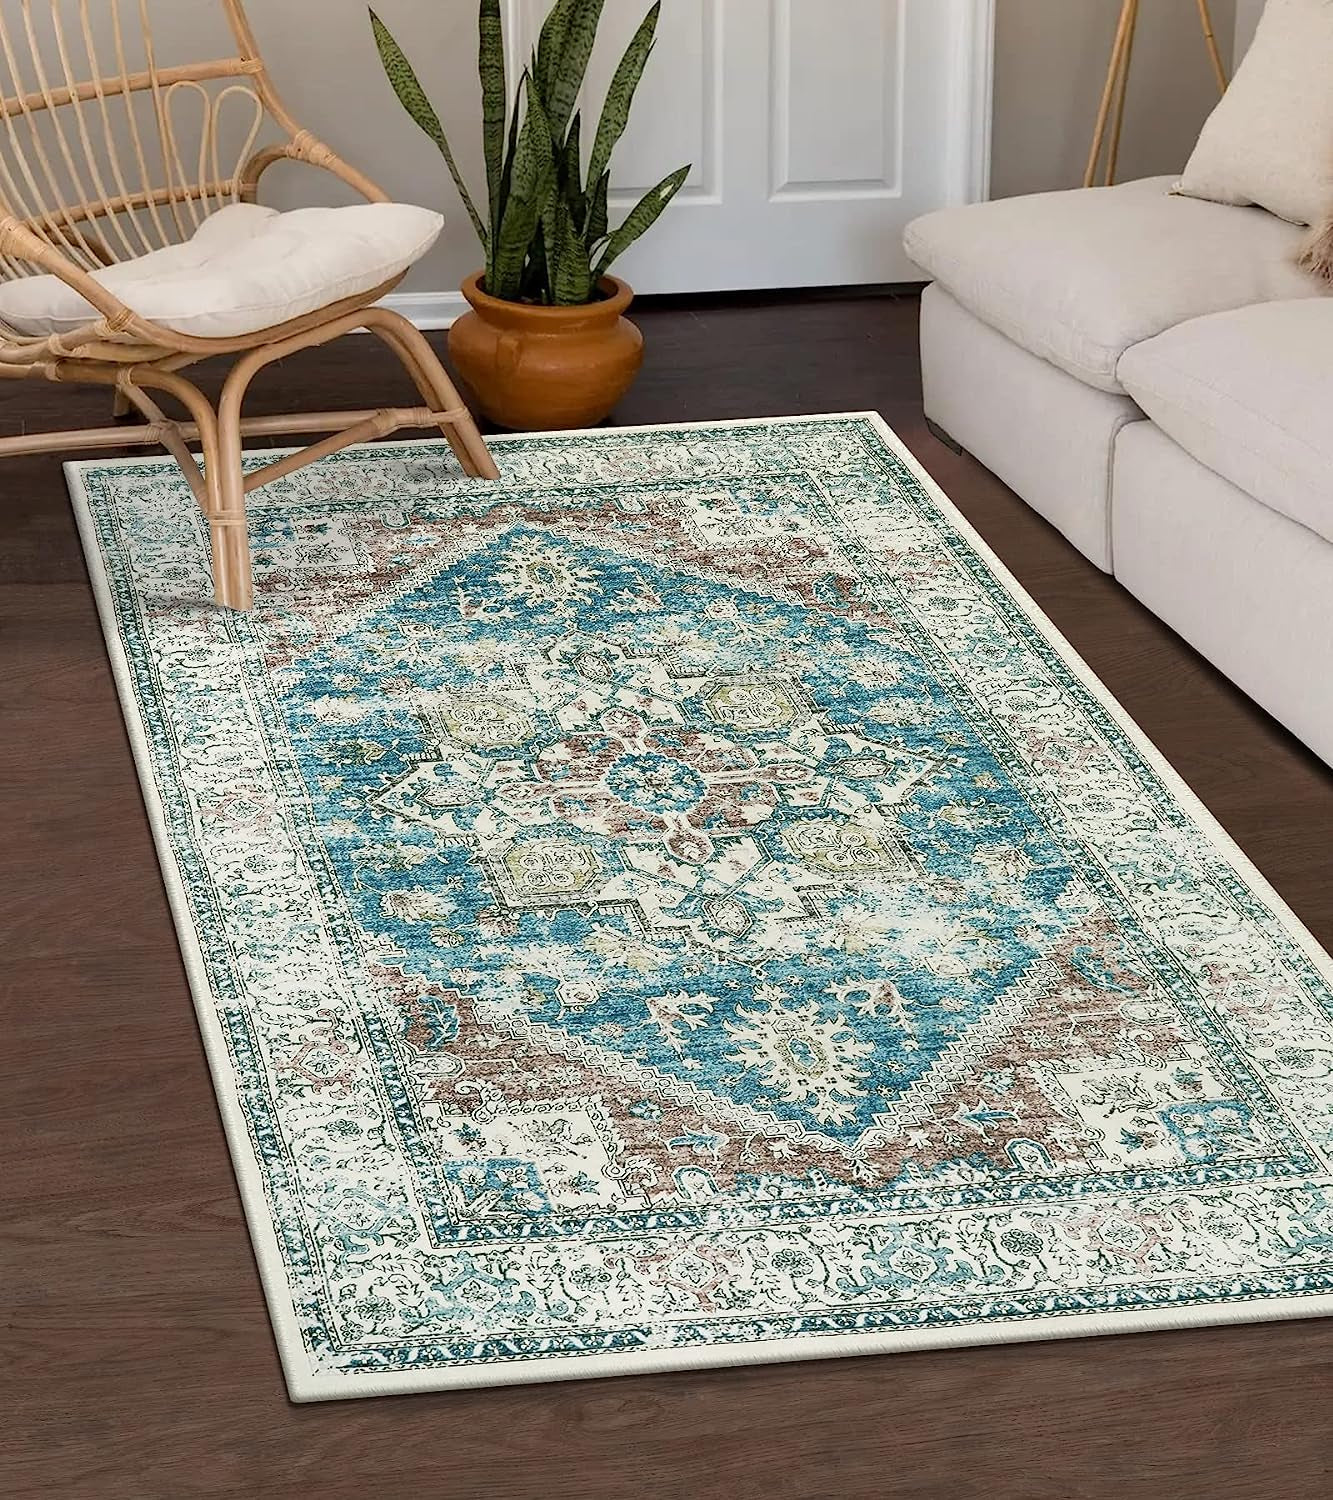  Persian Washable Area Rug 4X6 - Vintage Low-Pile Indoor Rug for Stylish Boho Bedroom, Living Room, and More - Non-Slip Retro Print Distressed Accent Rug - Ideal for Kitchen, Entryway, Office, Camper, Rv - Blue/Grey Color